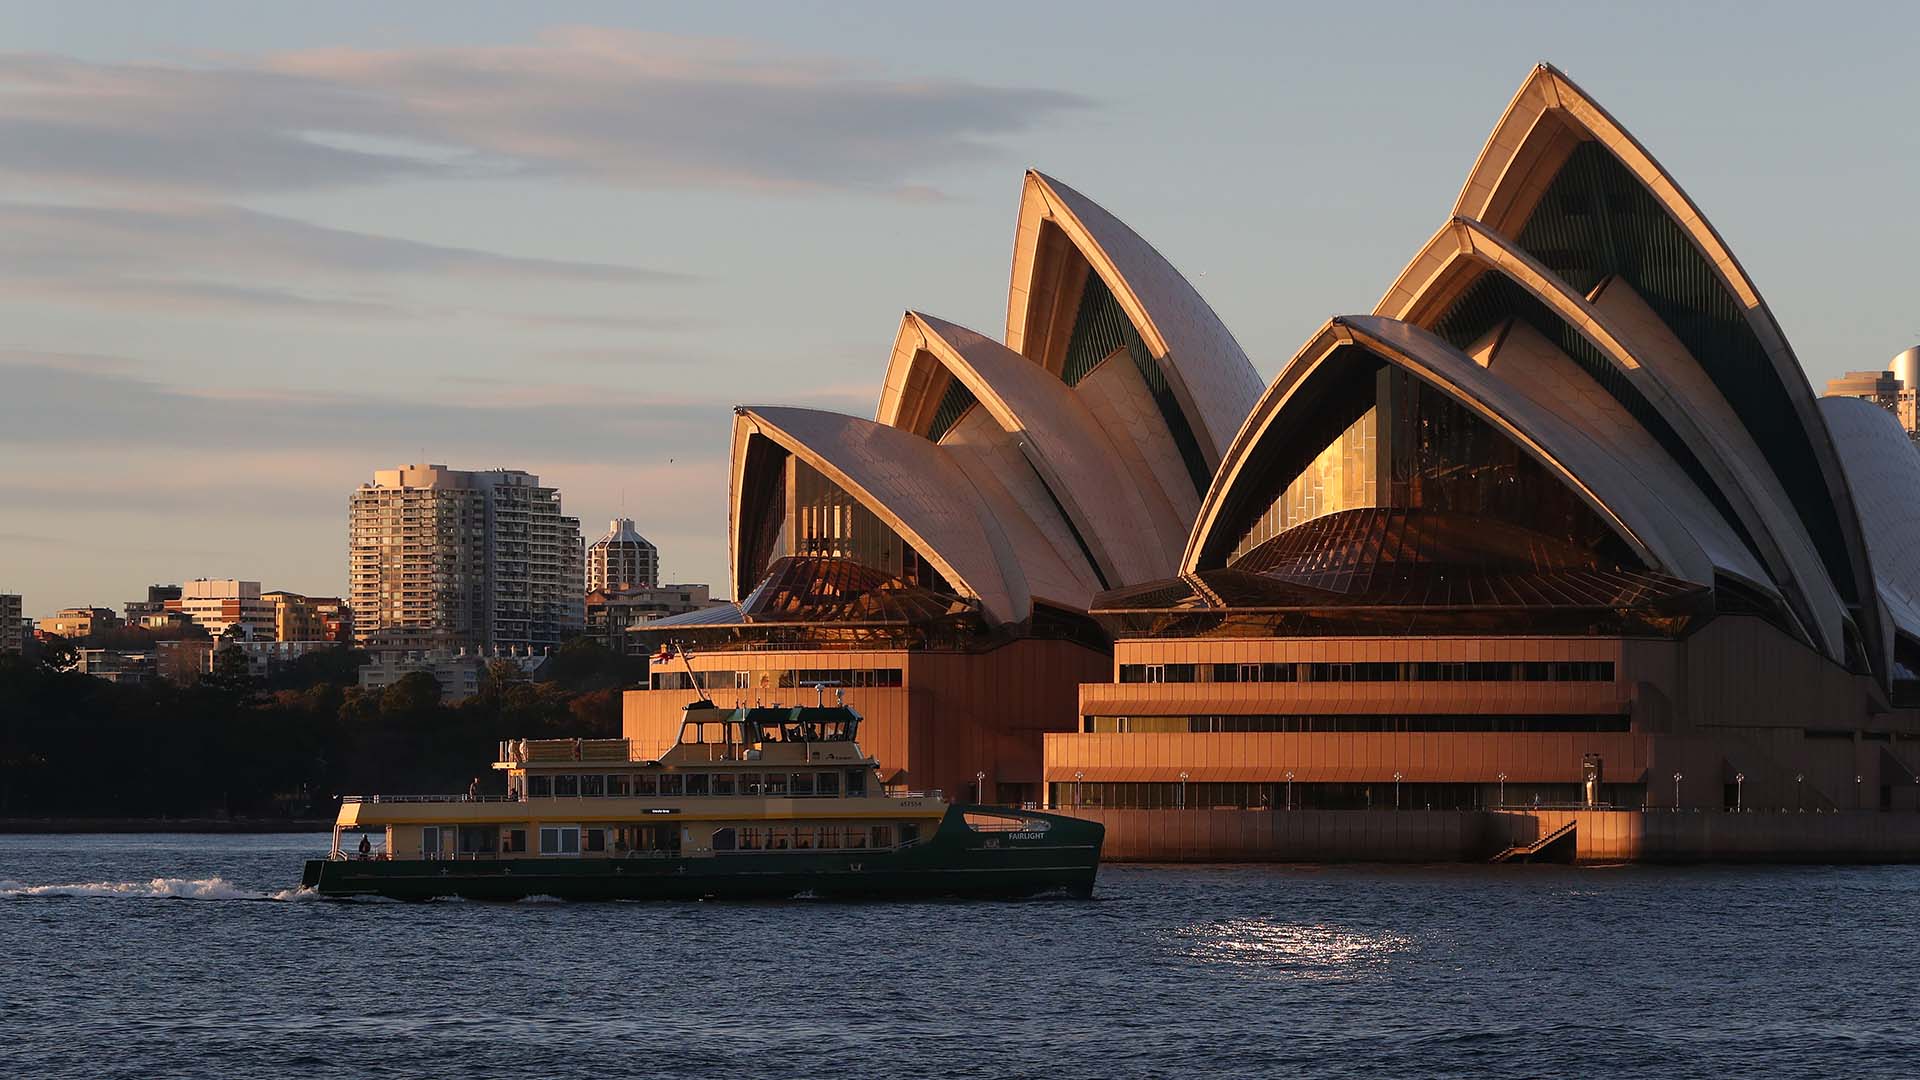 Sydney opera house and boats on the Sydney Harbour